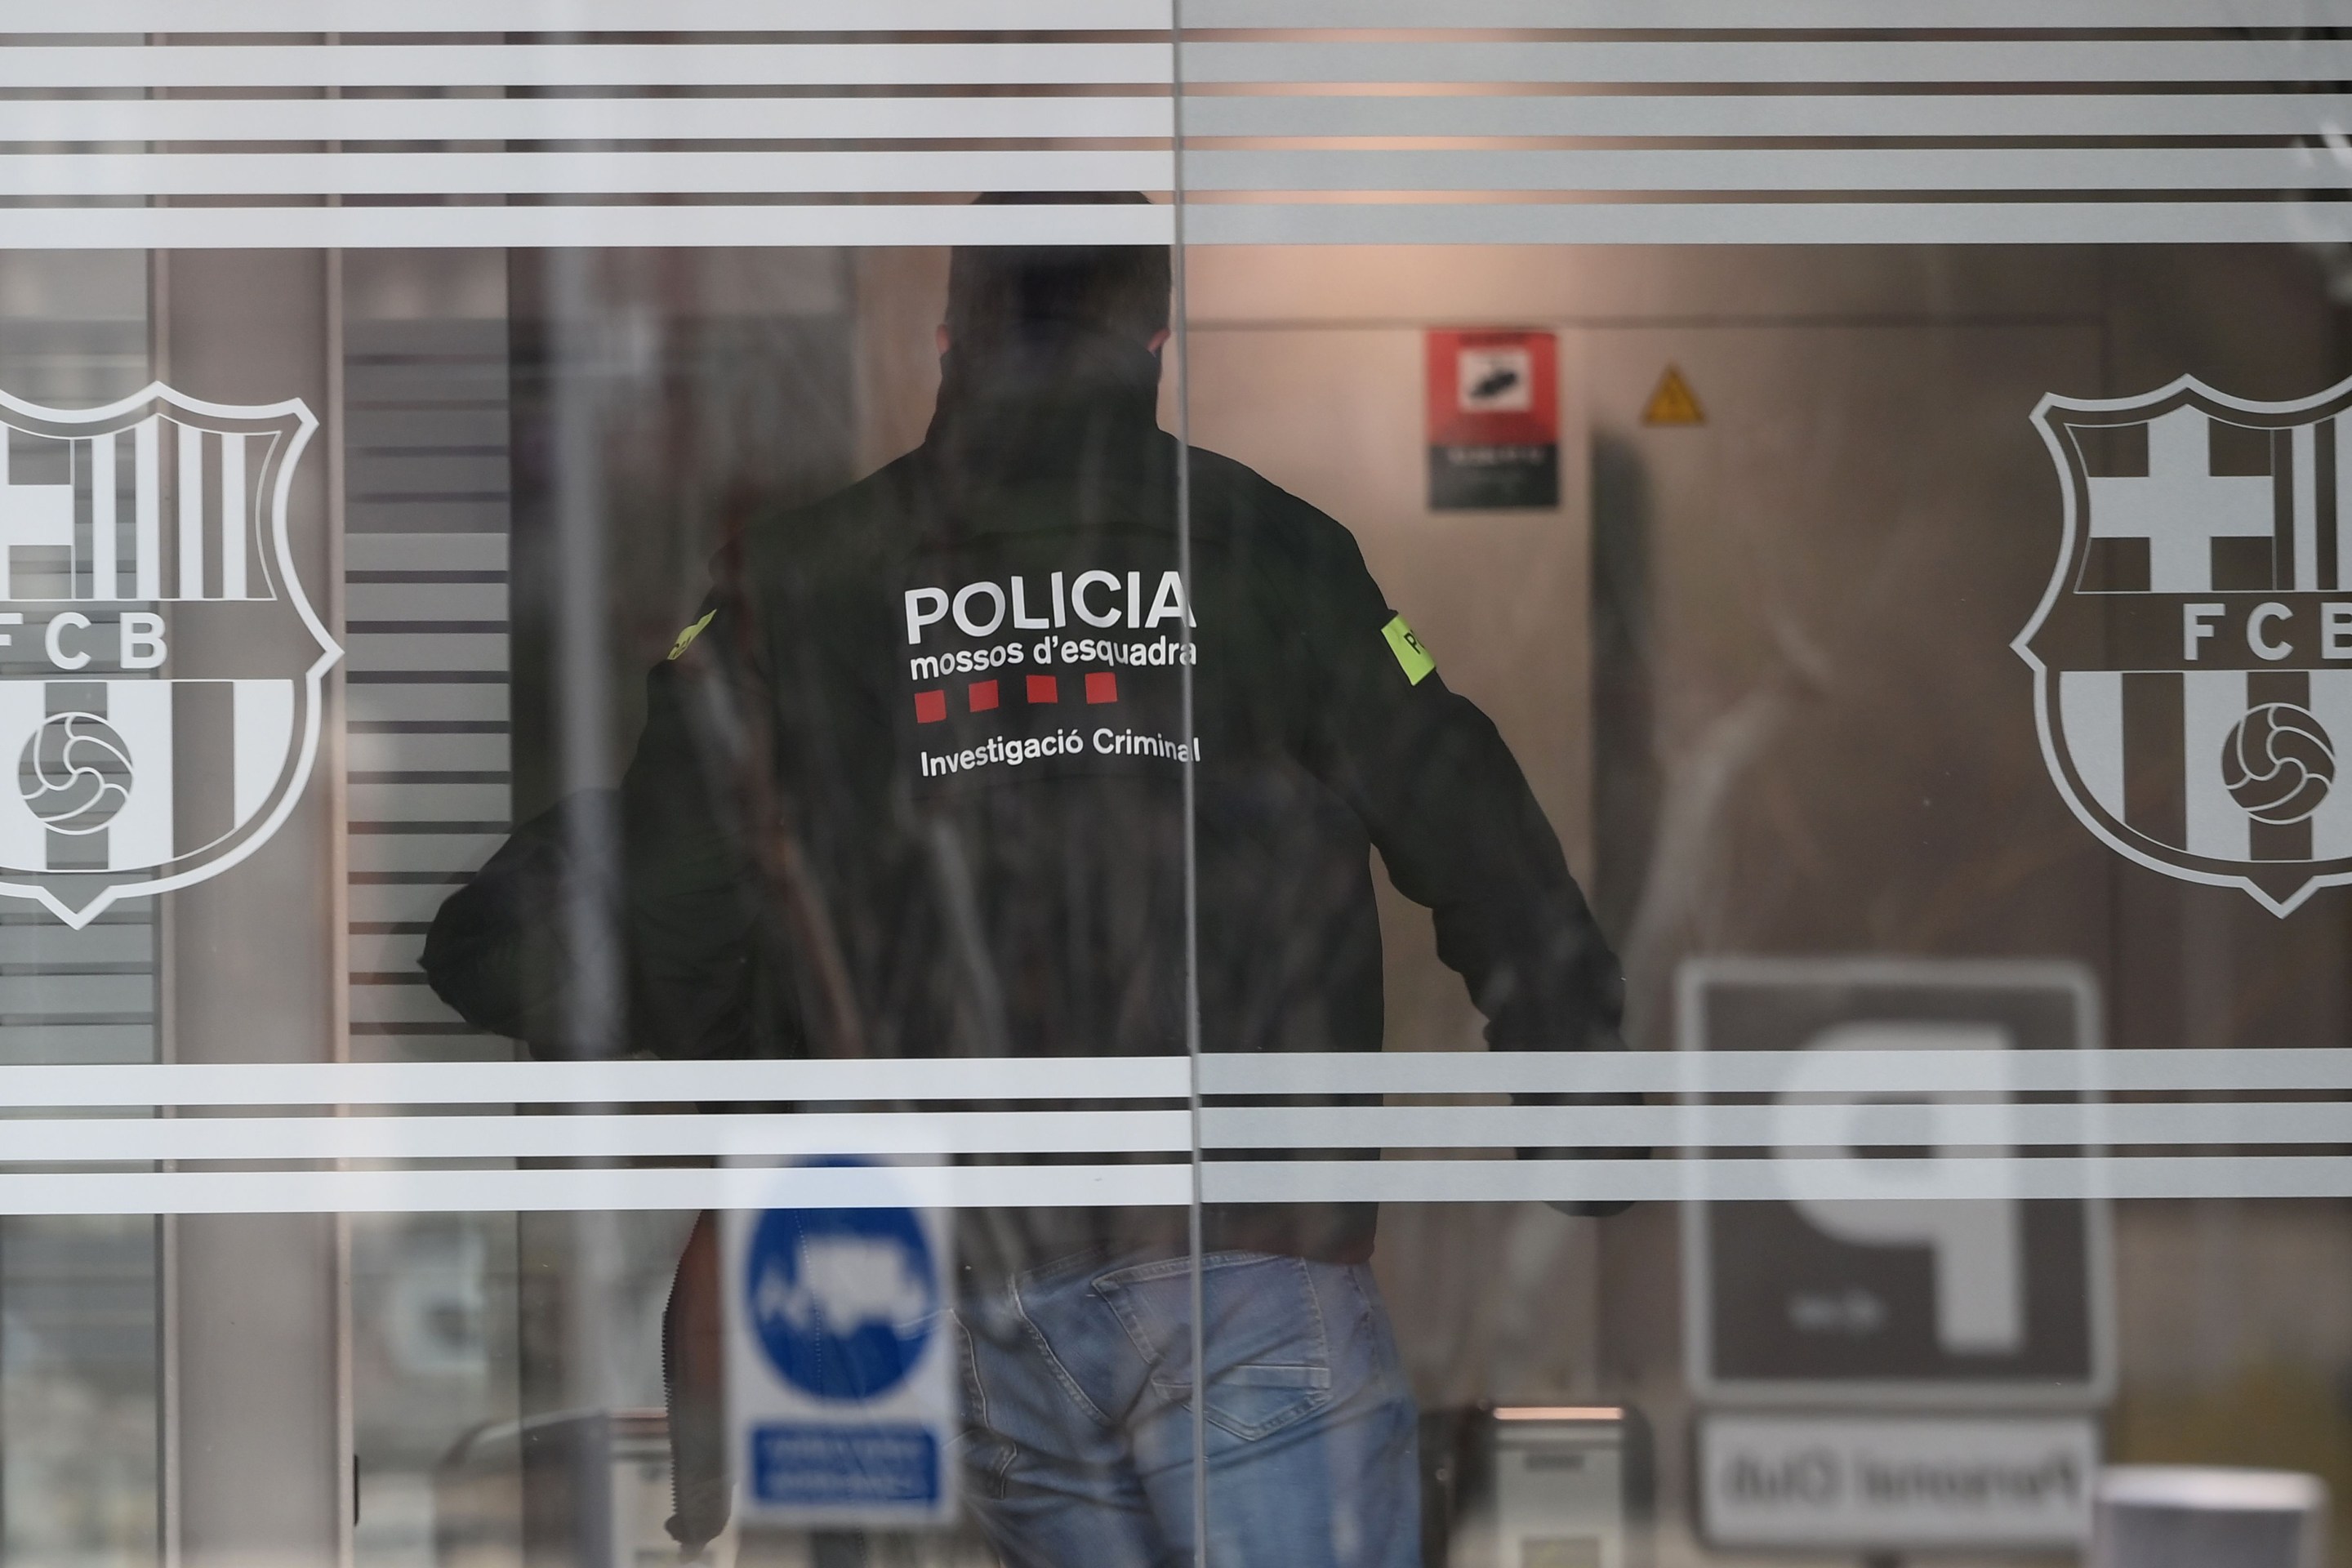 A policeman enters the offices of the Barcelona Football Club on March 01, 2021 in Barcelona during a police operation inside the building.